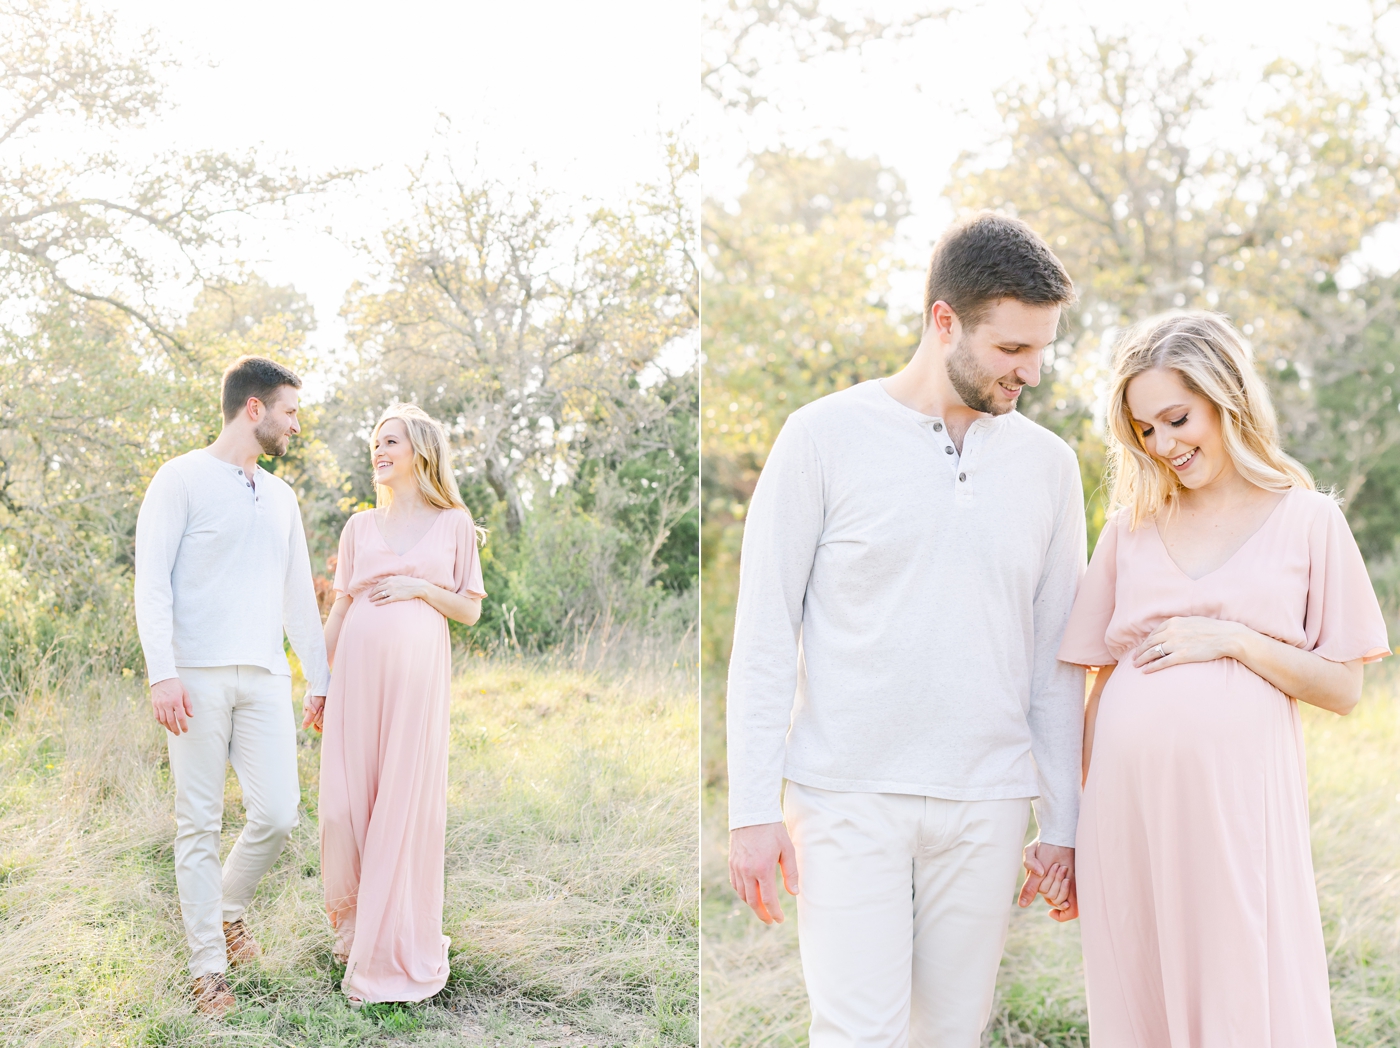 Expecting parents walking together during maternity photoshoot in Austin. Photo by Sana Ahmed Photography.